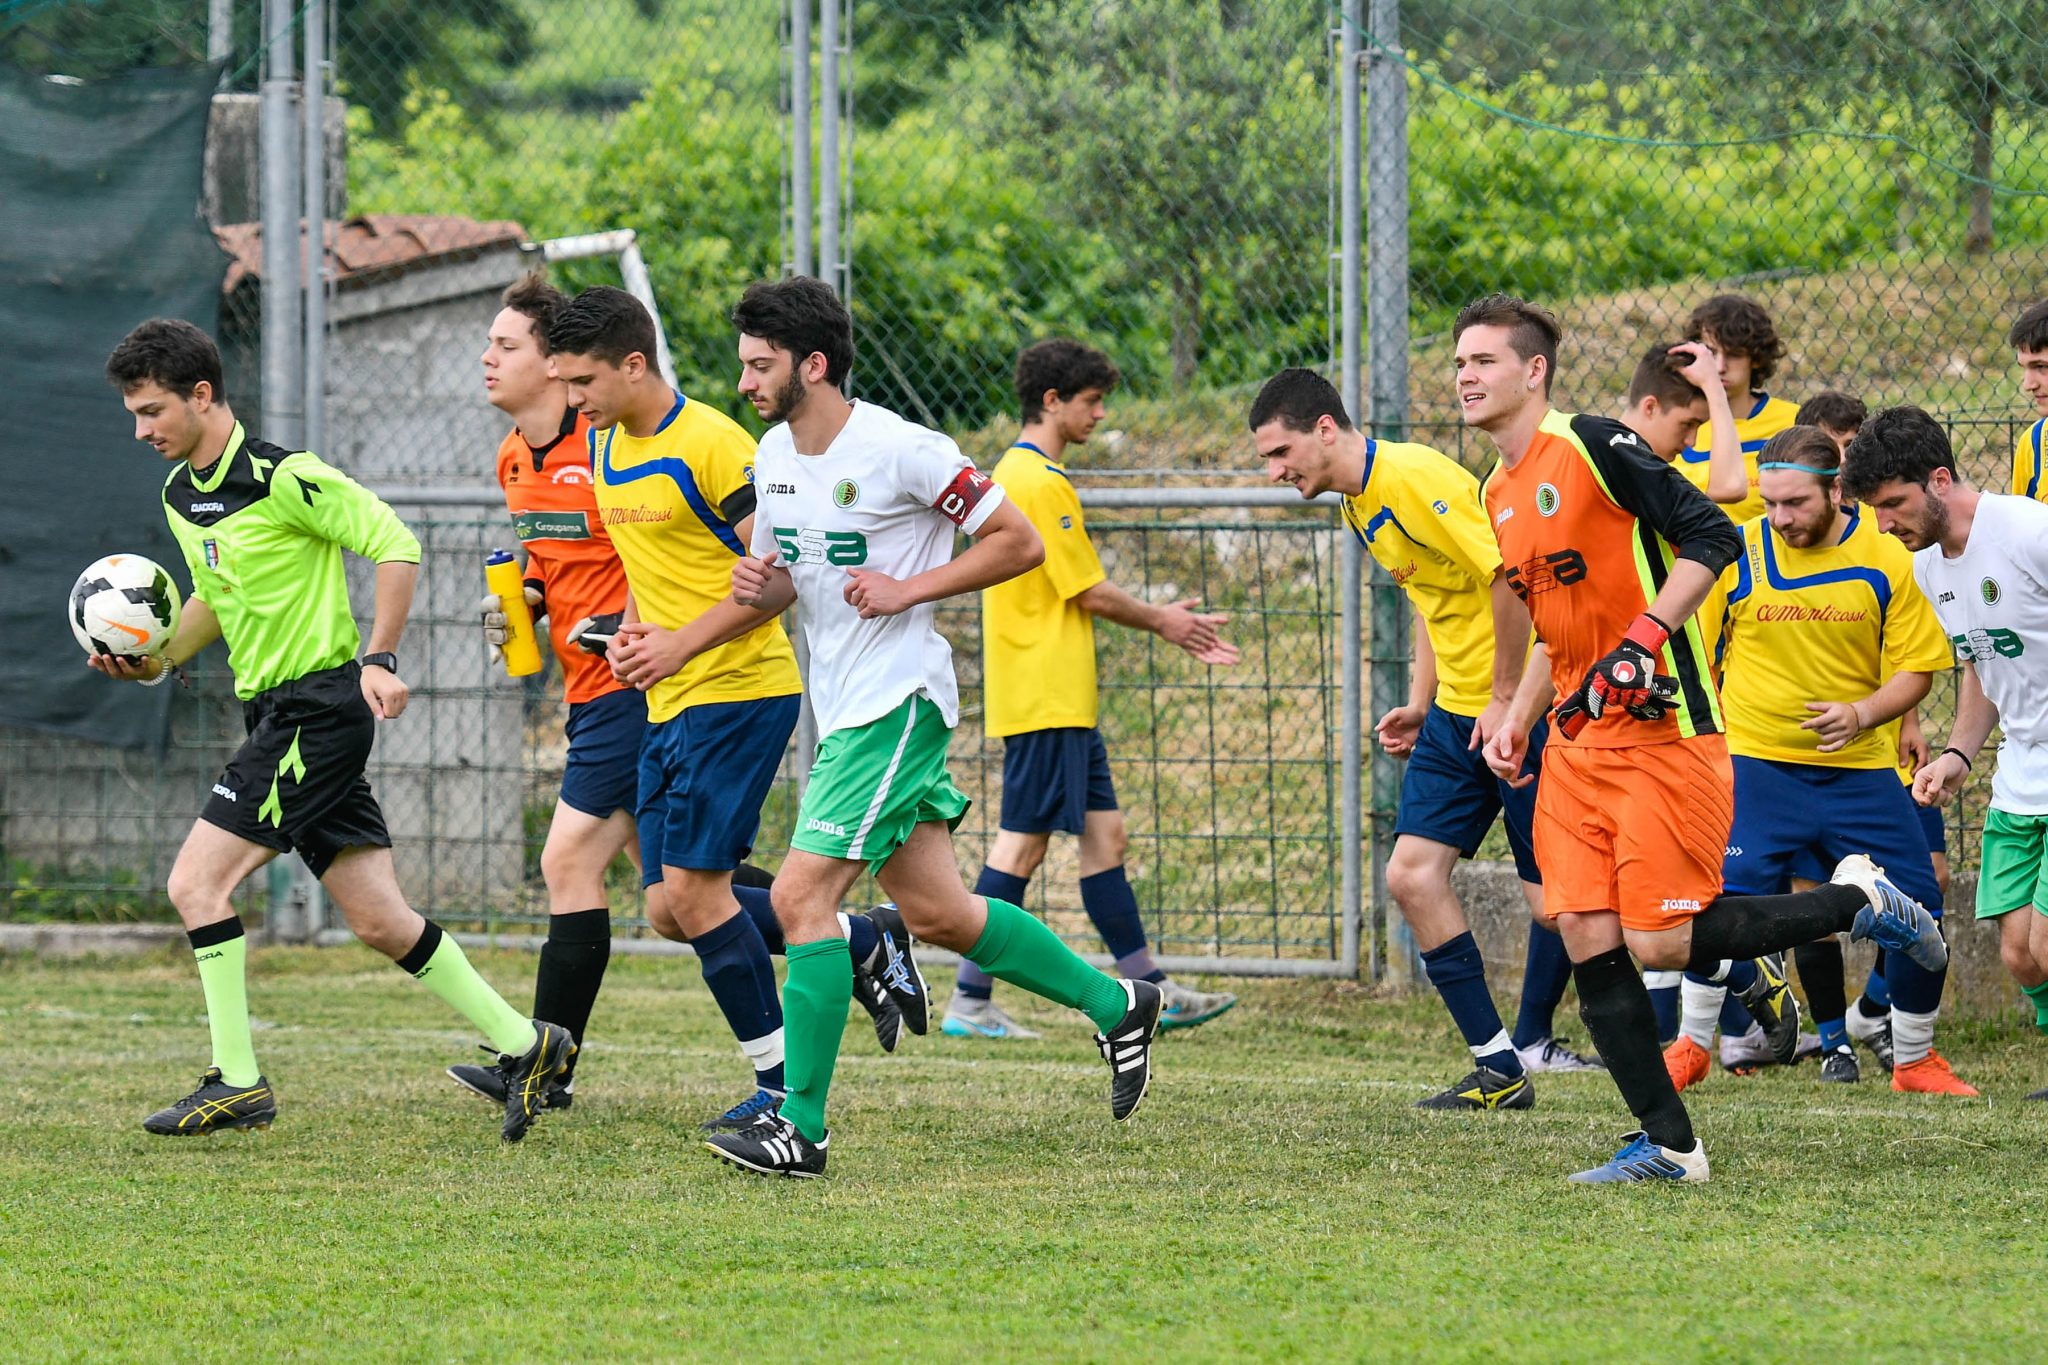 Valpolicella Cup - training players - Road to Sport